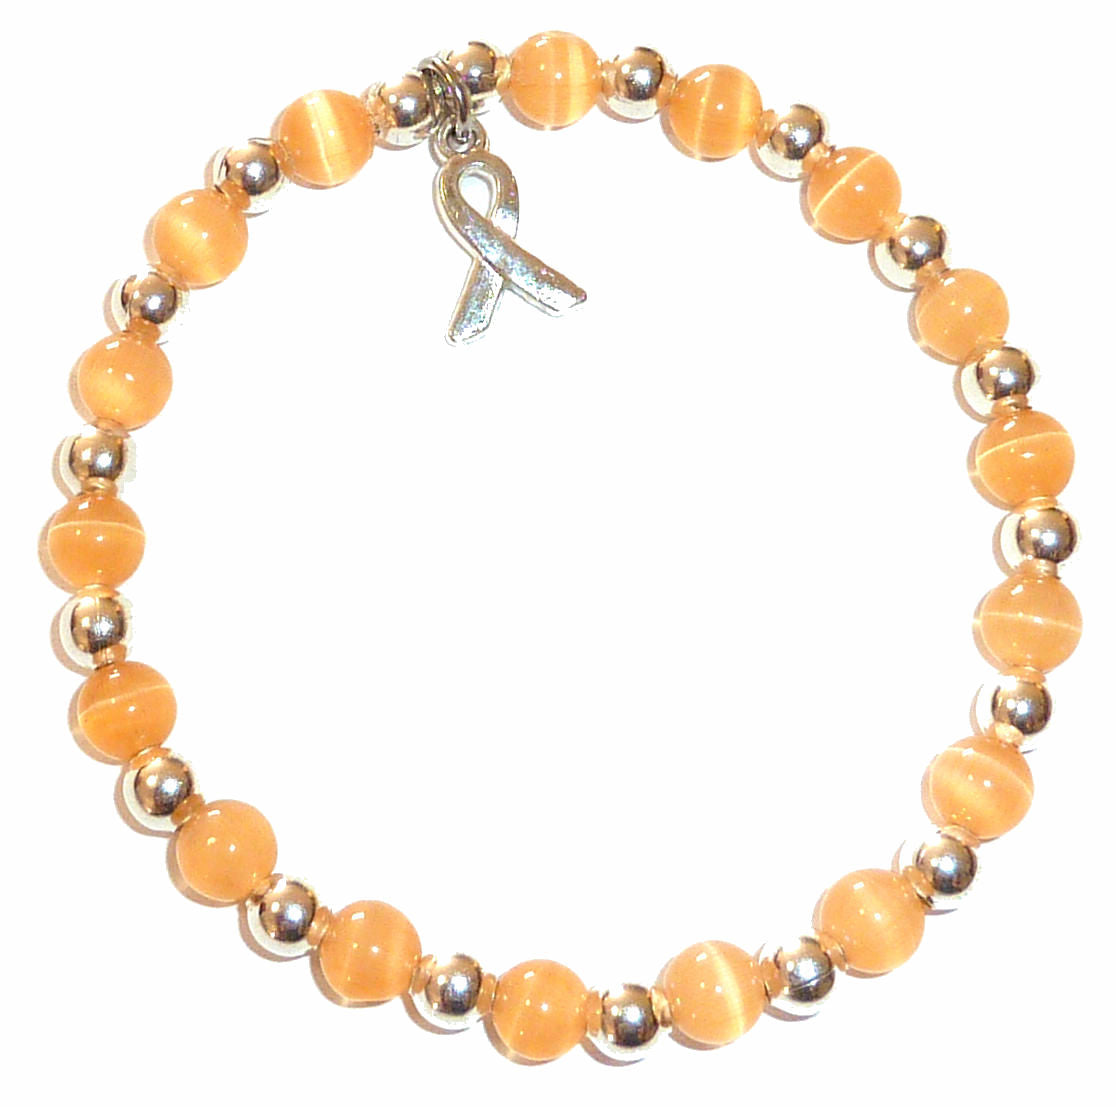 Peach (Uterine Cancer) Packaged Cancer Awareness Bracelet 6mm - Stretch (will stretch to fit most Adults)